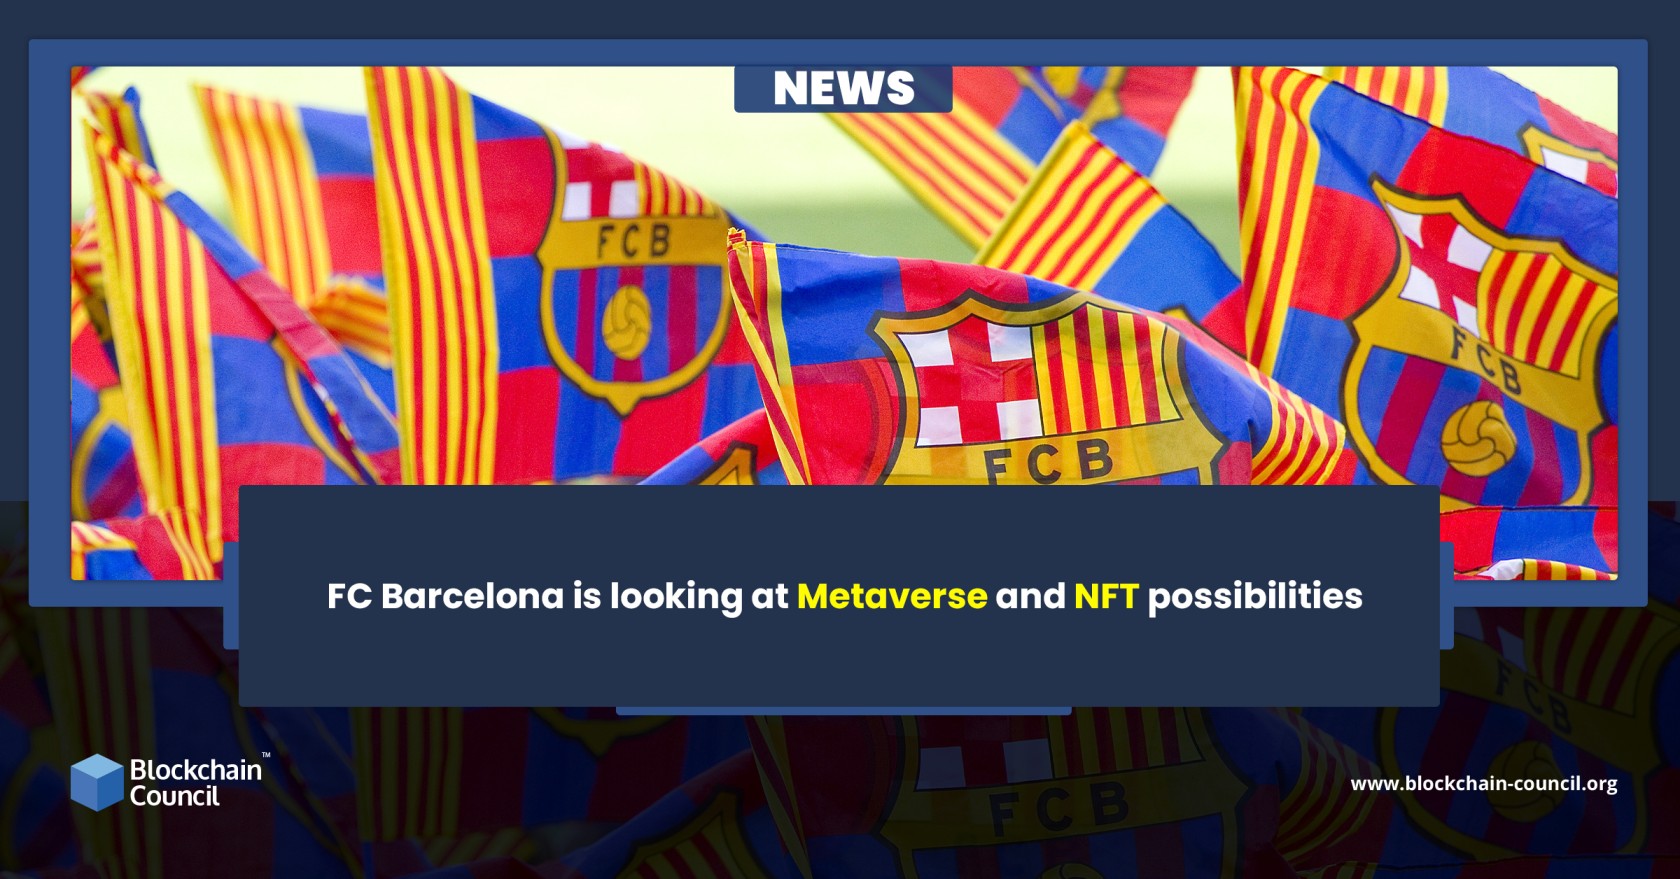 FC Barcelona is looking at Metaverse and NFT possibilities